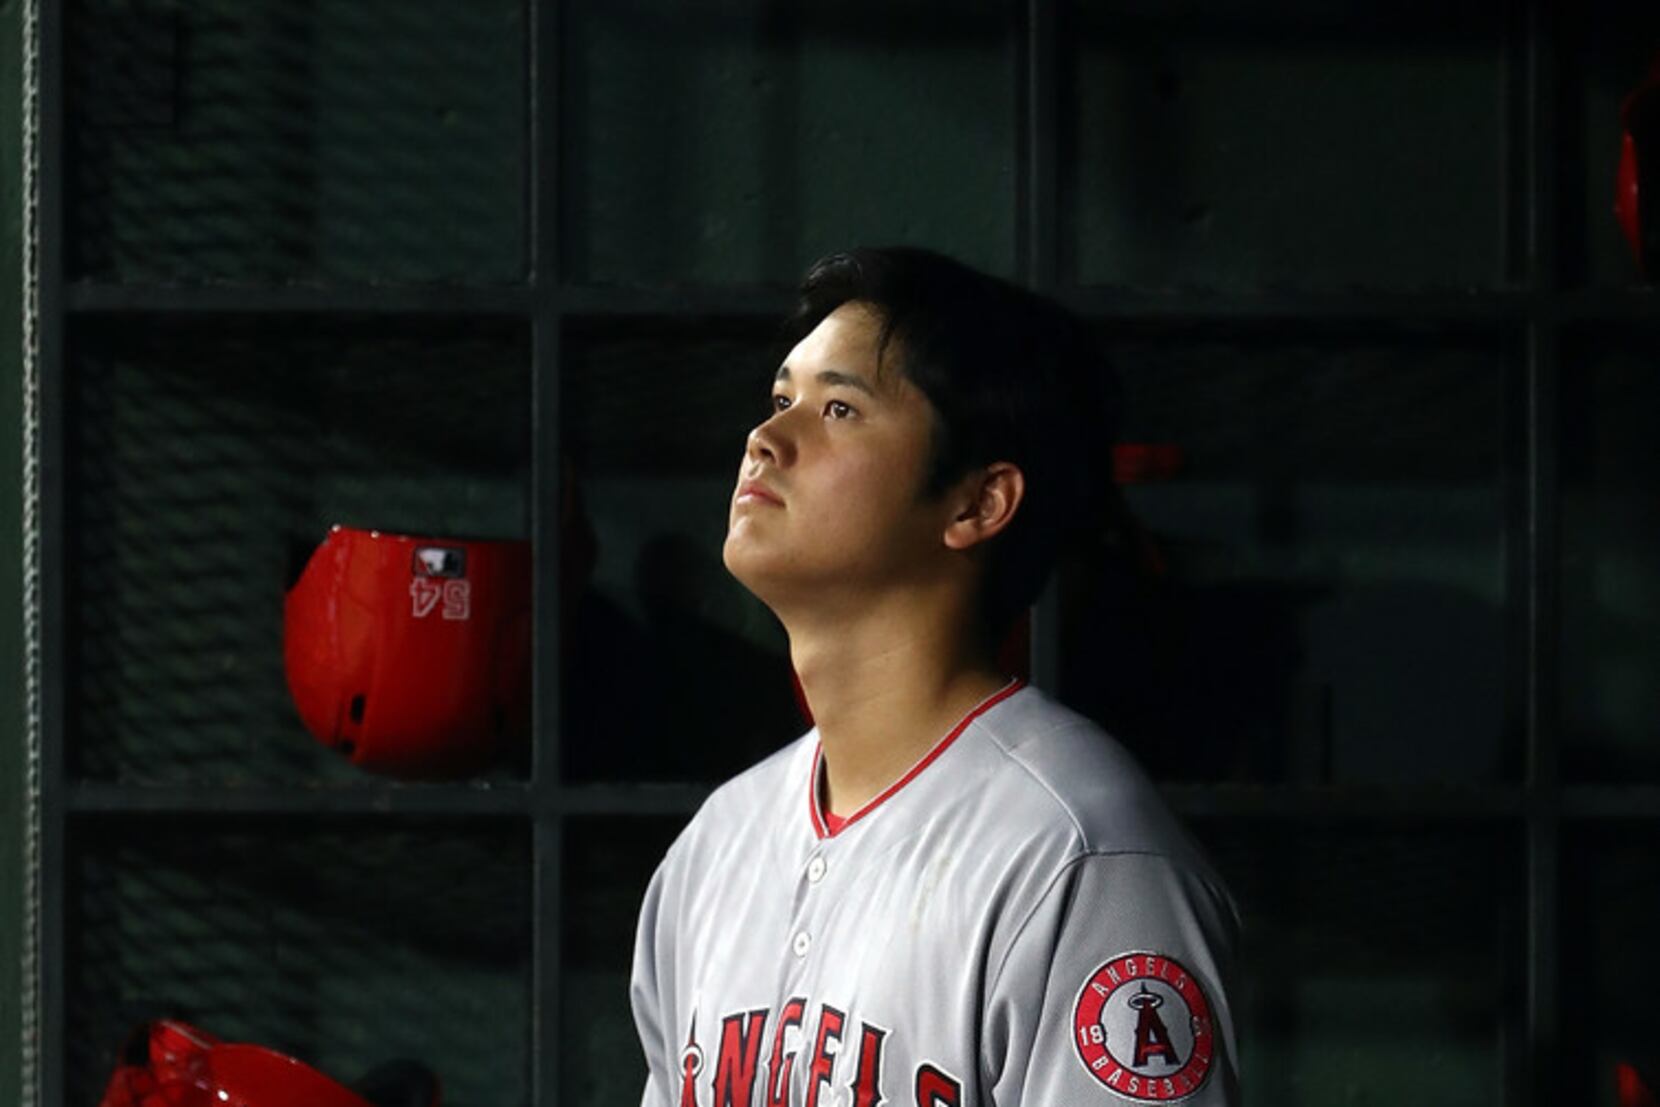 Los Angeles Angels: Biggest flaw being exposed early on